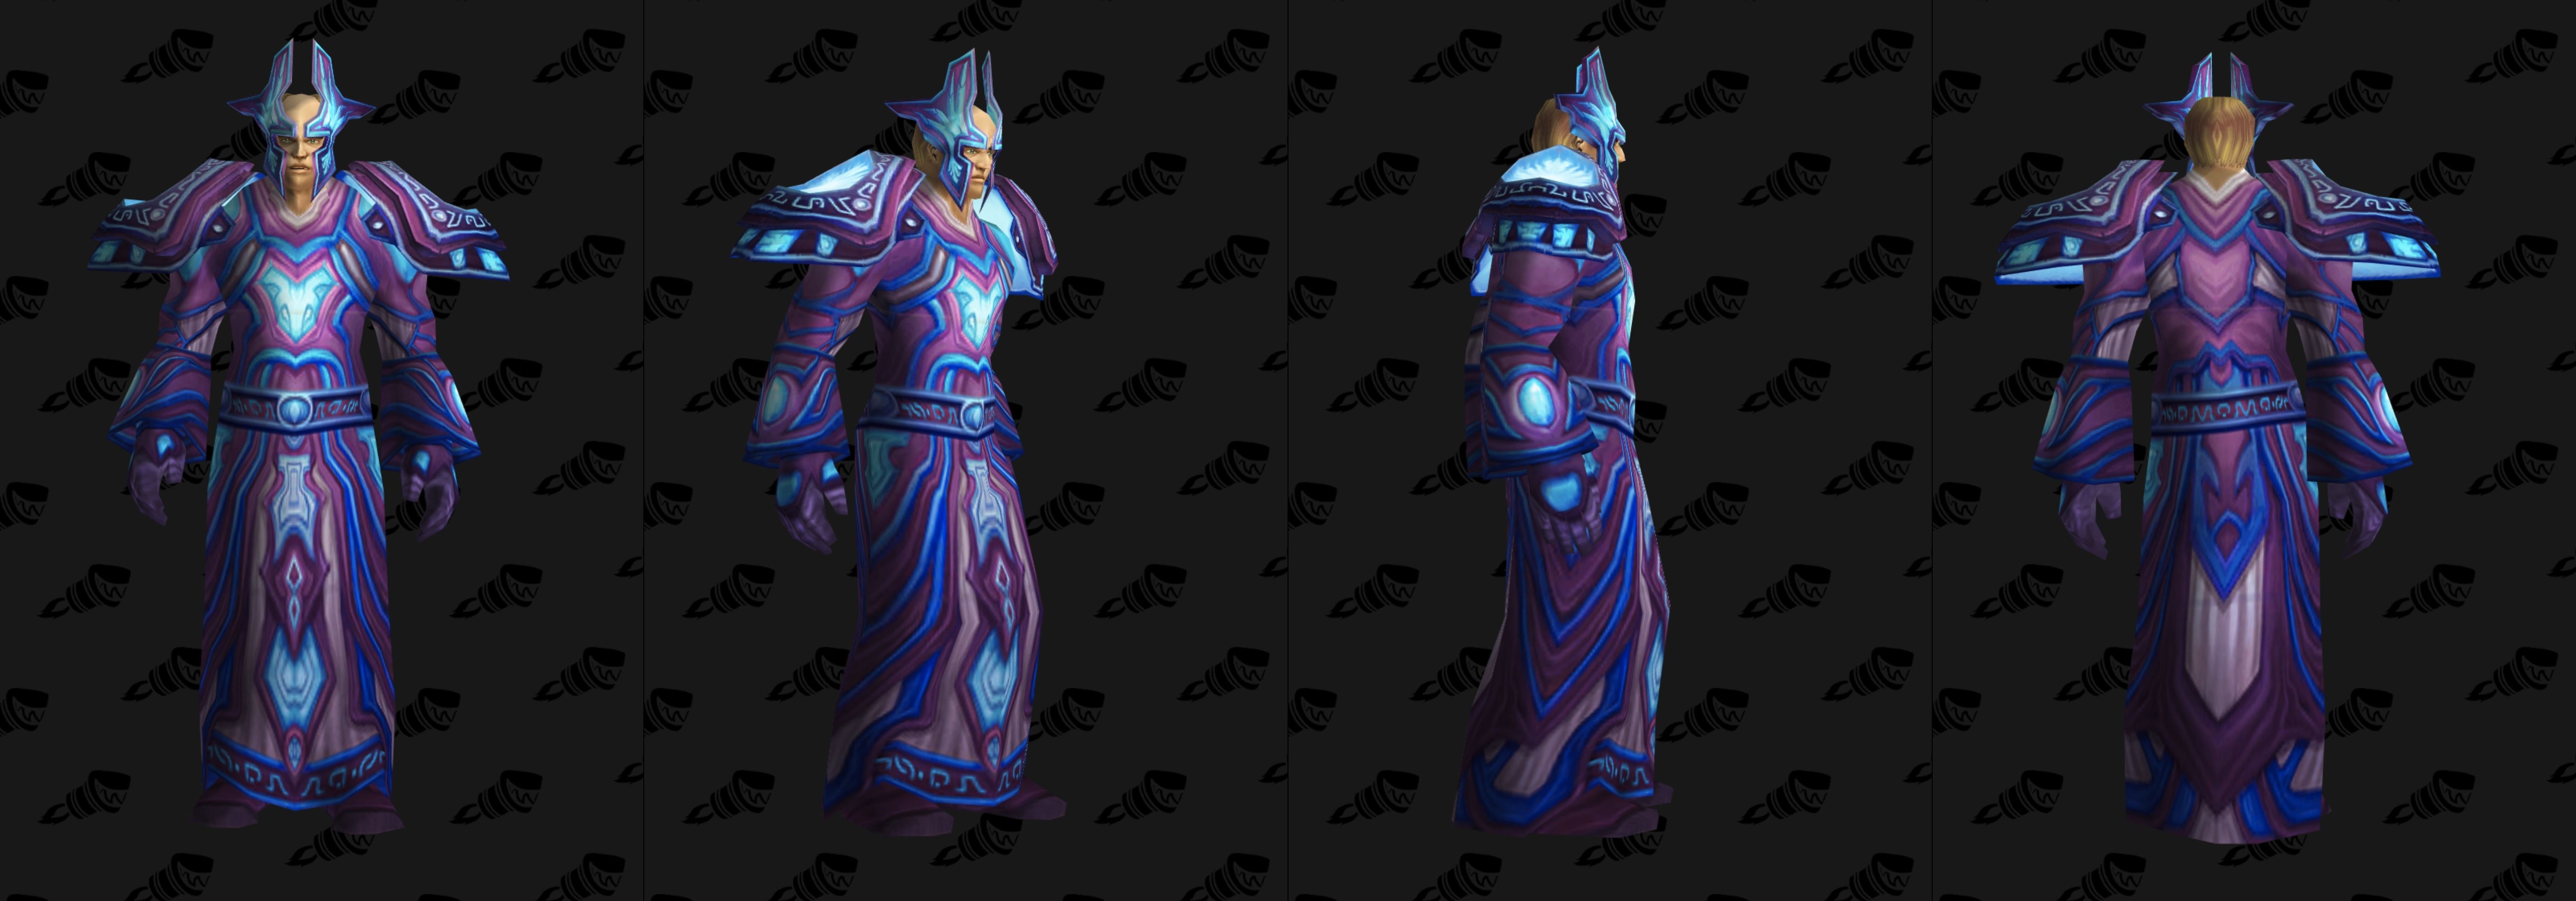 The Tier 2 Set for Mages is called. 